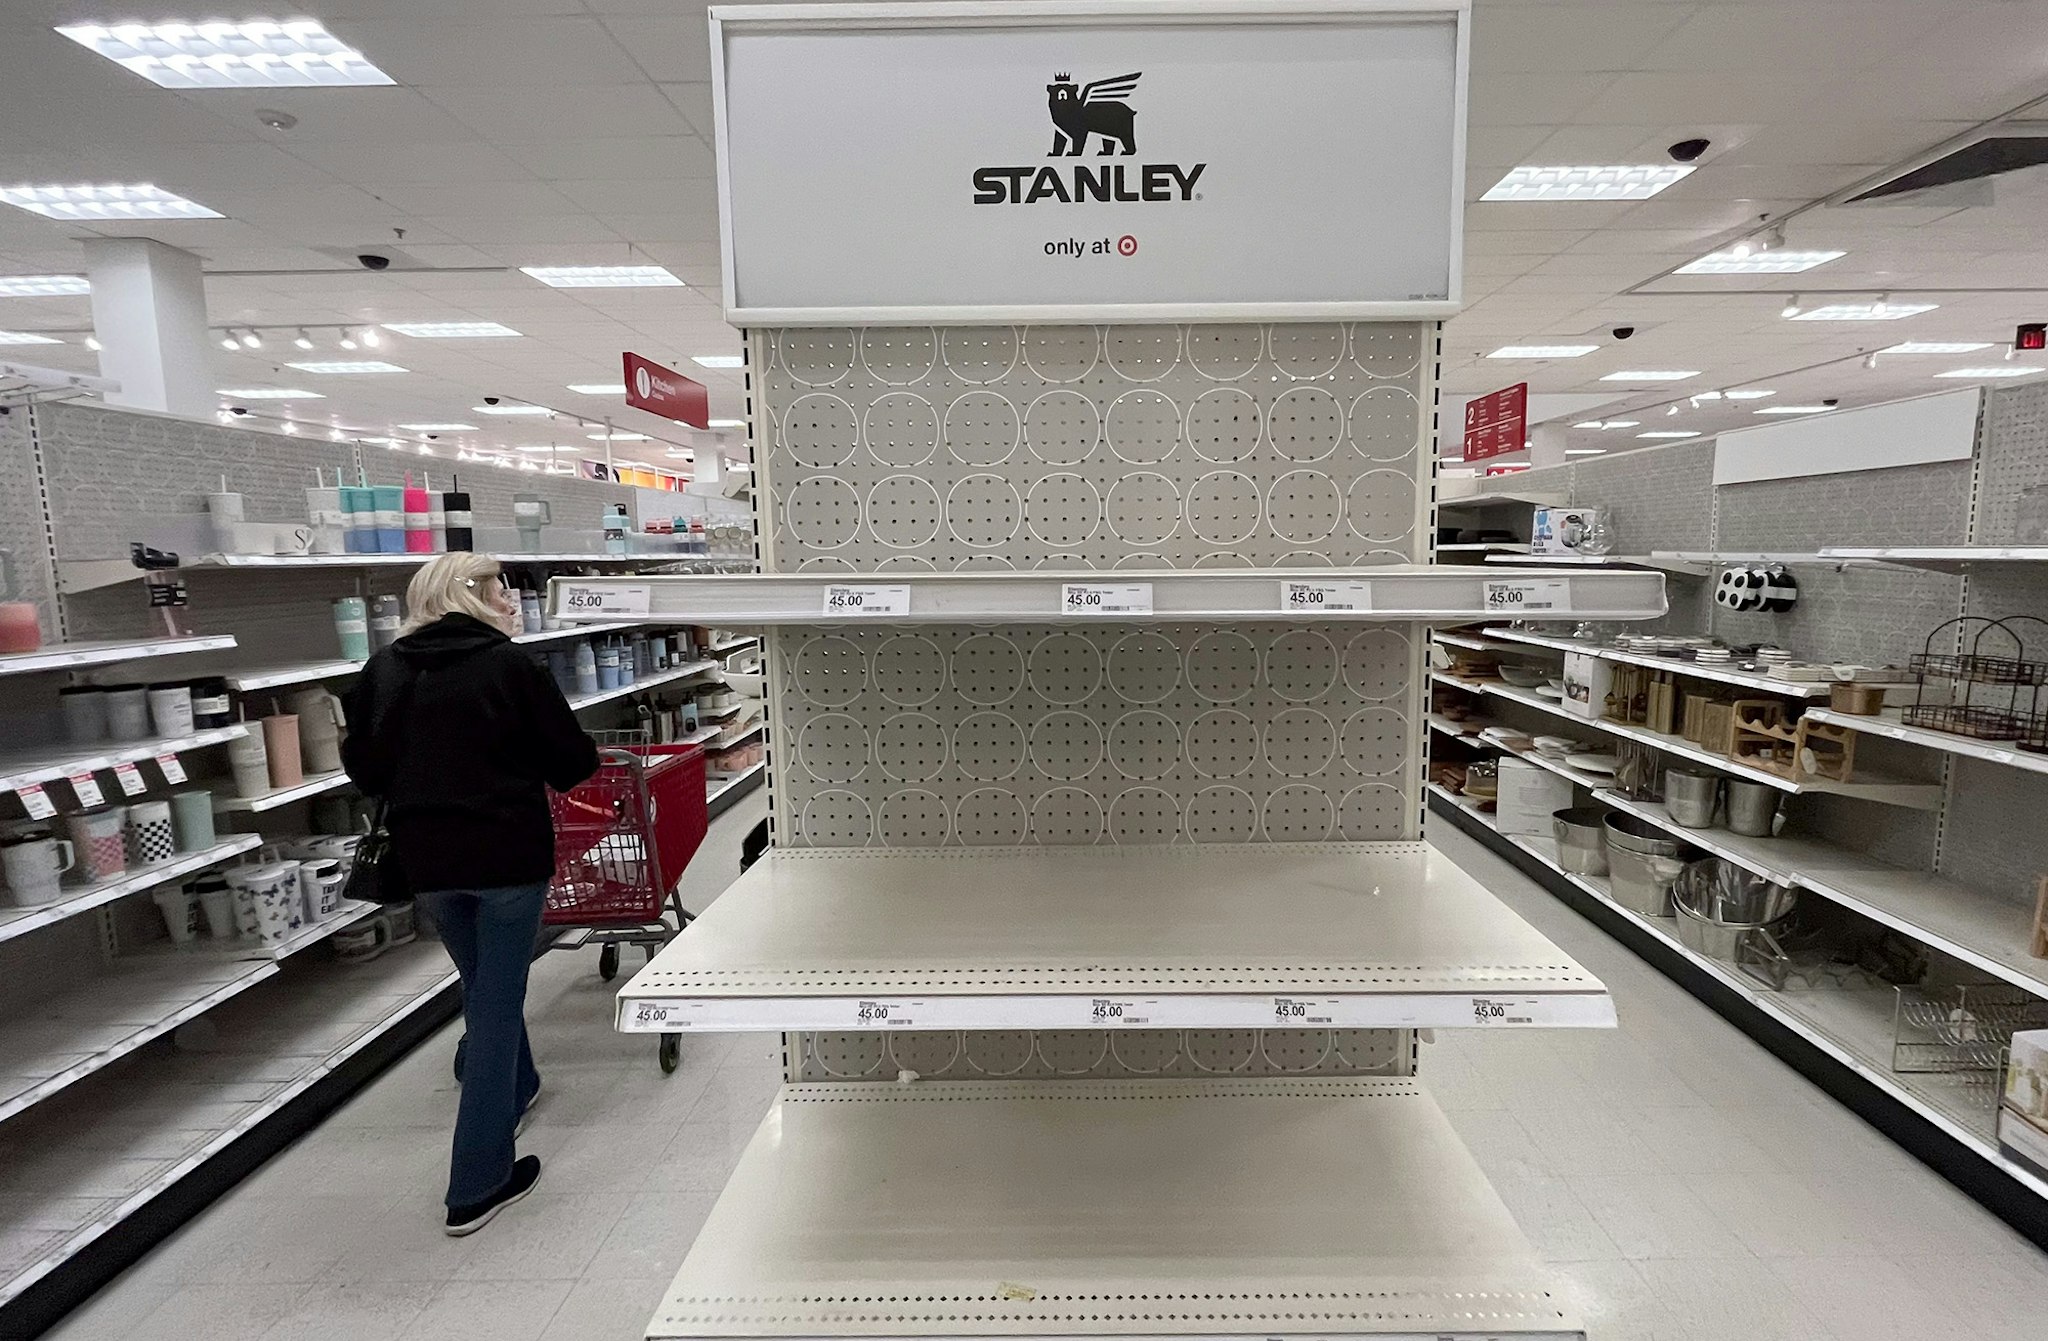 Canoga Park, CA - January 09: A shopper passes empty shelves once stocked with Stanley insulated steel tumblers at a Target store on Tuesday, Jan. 9, 2024 in Canoga Park, CA. The Stanley cups, not the Stanley Cup awarded to the National Hockey League champion, has prompted long lines outside of Target stores in the dead of night. Ugly fights have broken out. Shouting matches have erupted. All this hubbub over insulated steel tumblers sold in various colors at Target and Starbucks. (Brian van der Brug / Los Angeles Times via Getty Images)